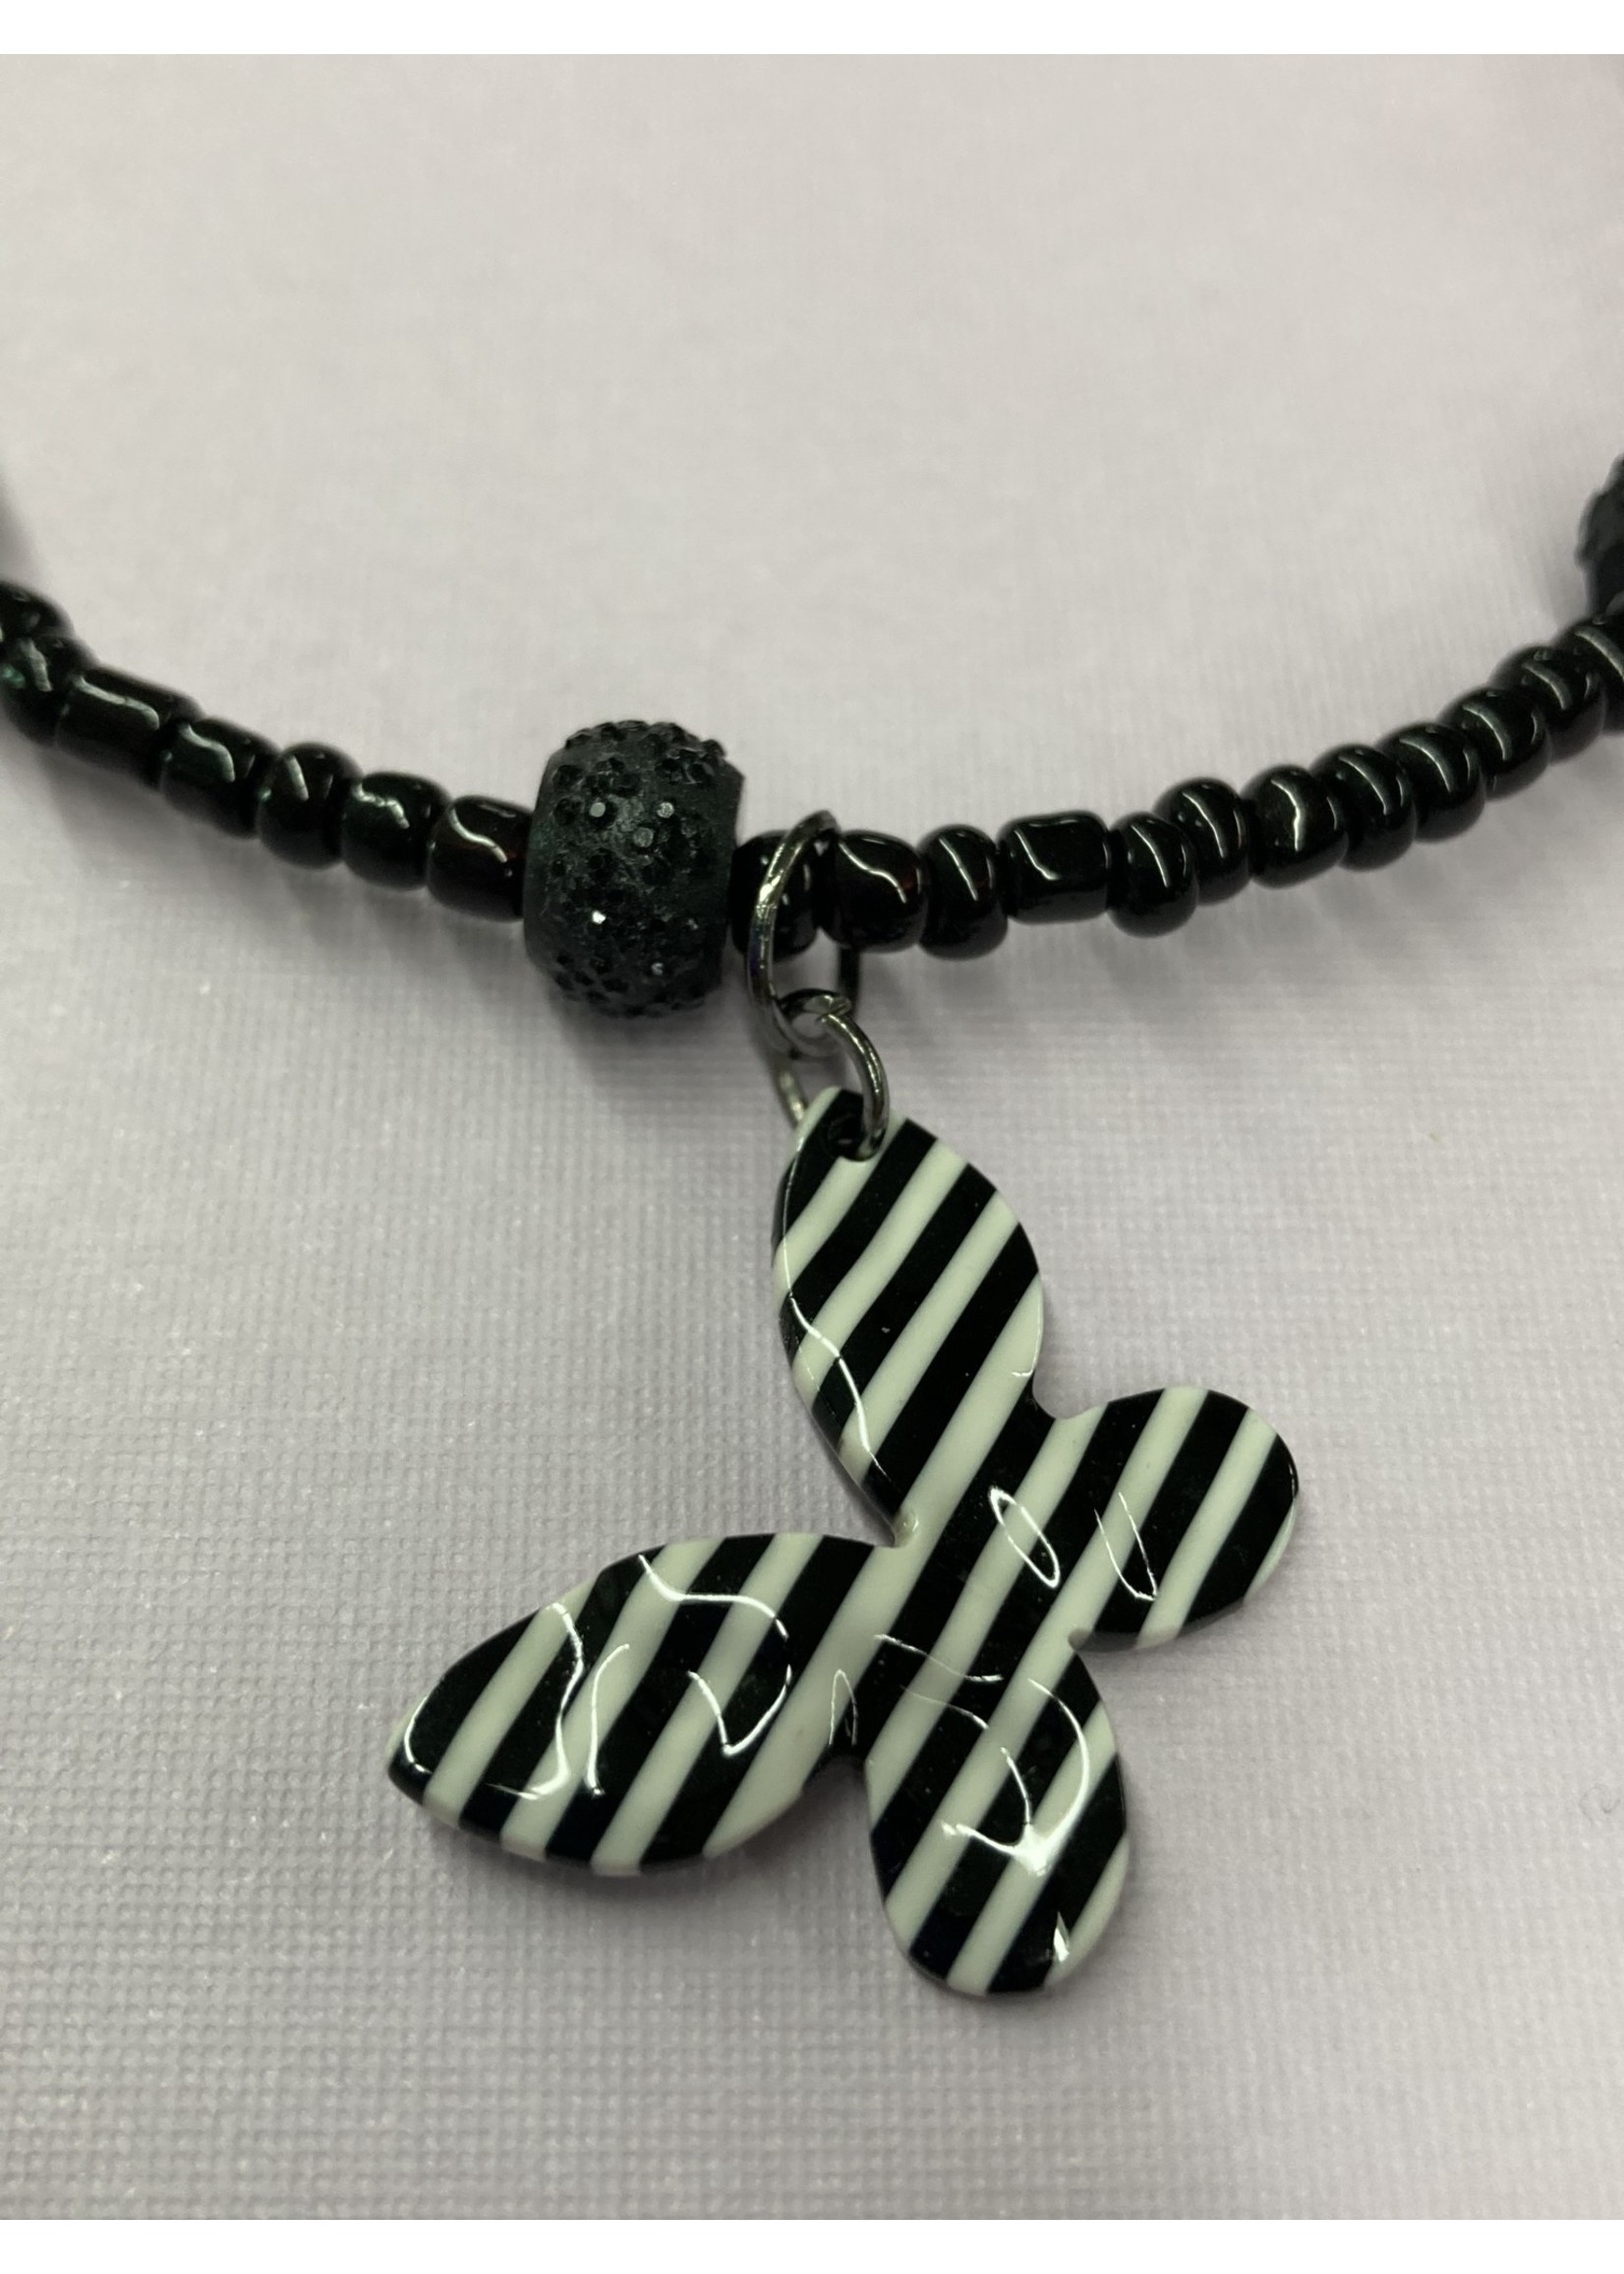 Our Twisted Dahlia Ch005 Black Beads with Black and White Stripe Butterfly Charm Choker